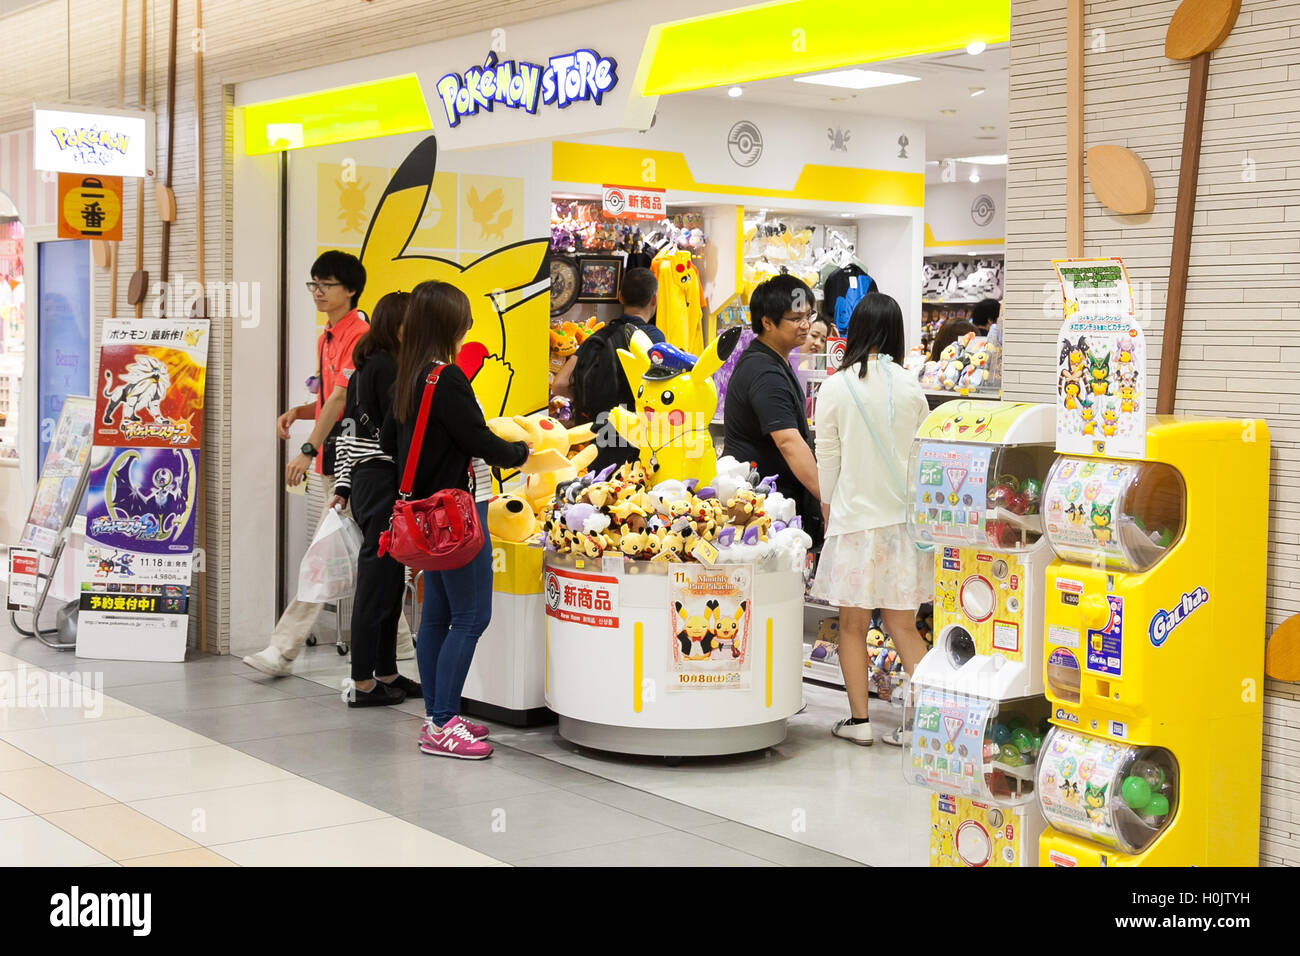 Tokyo Japan 21st September 16 Customers Shop At Pokemon Store At Tokyo Station On September 21st 16 Tokyo Japan The Pokemon Go Plus Wearable Accessory Completely Sold Out Online And At The